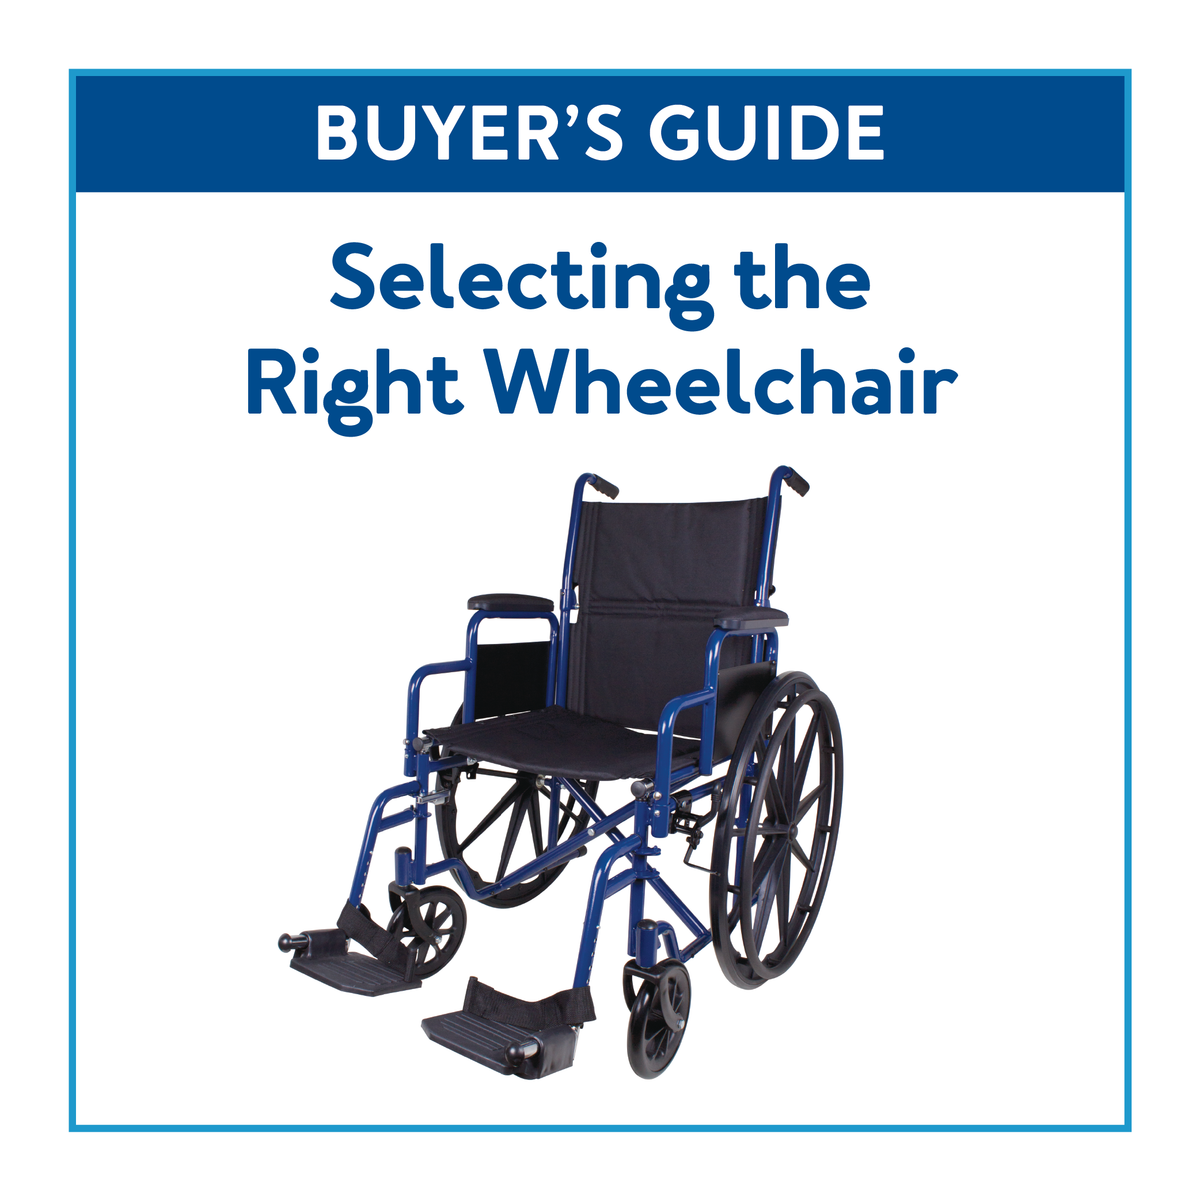 A Carex wheelchair surrounded by a blue border with text “Buyer’s guide: Selecting the Right Wheelchair